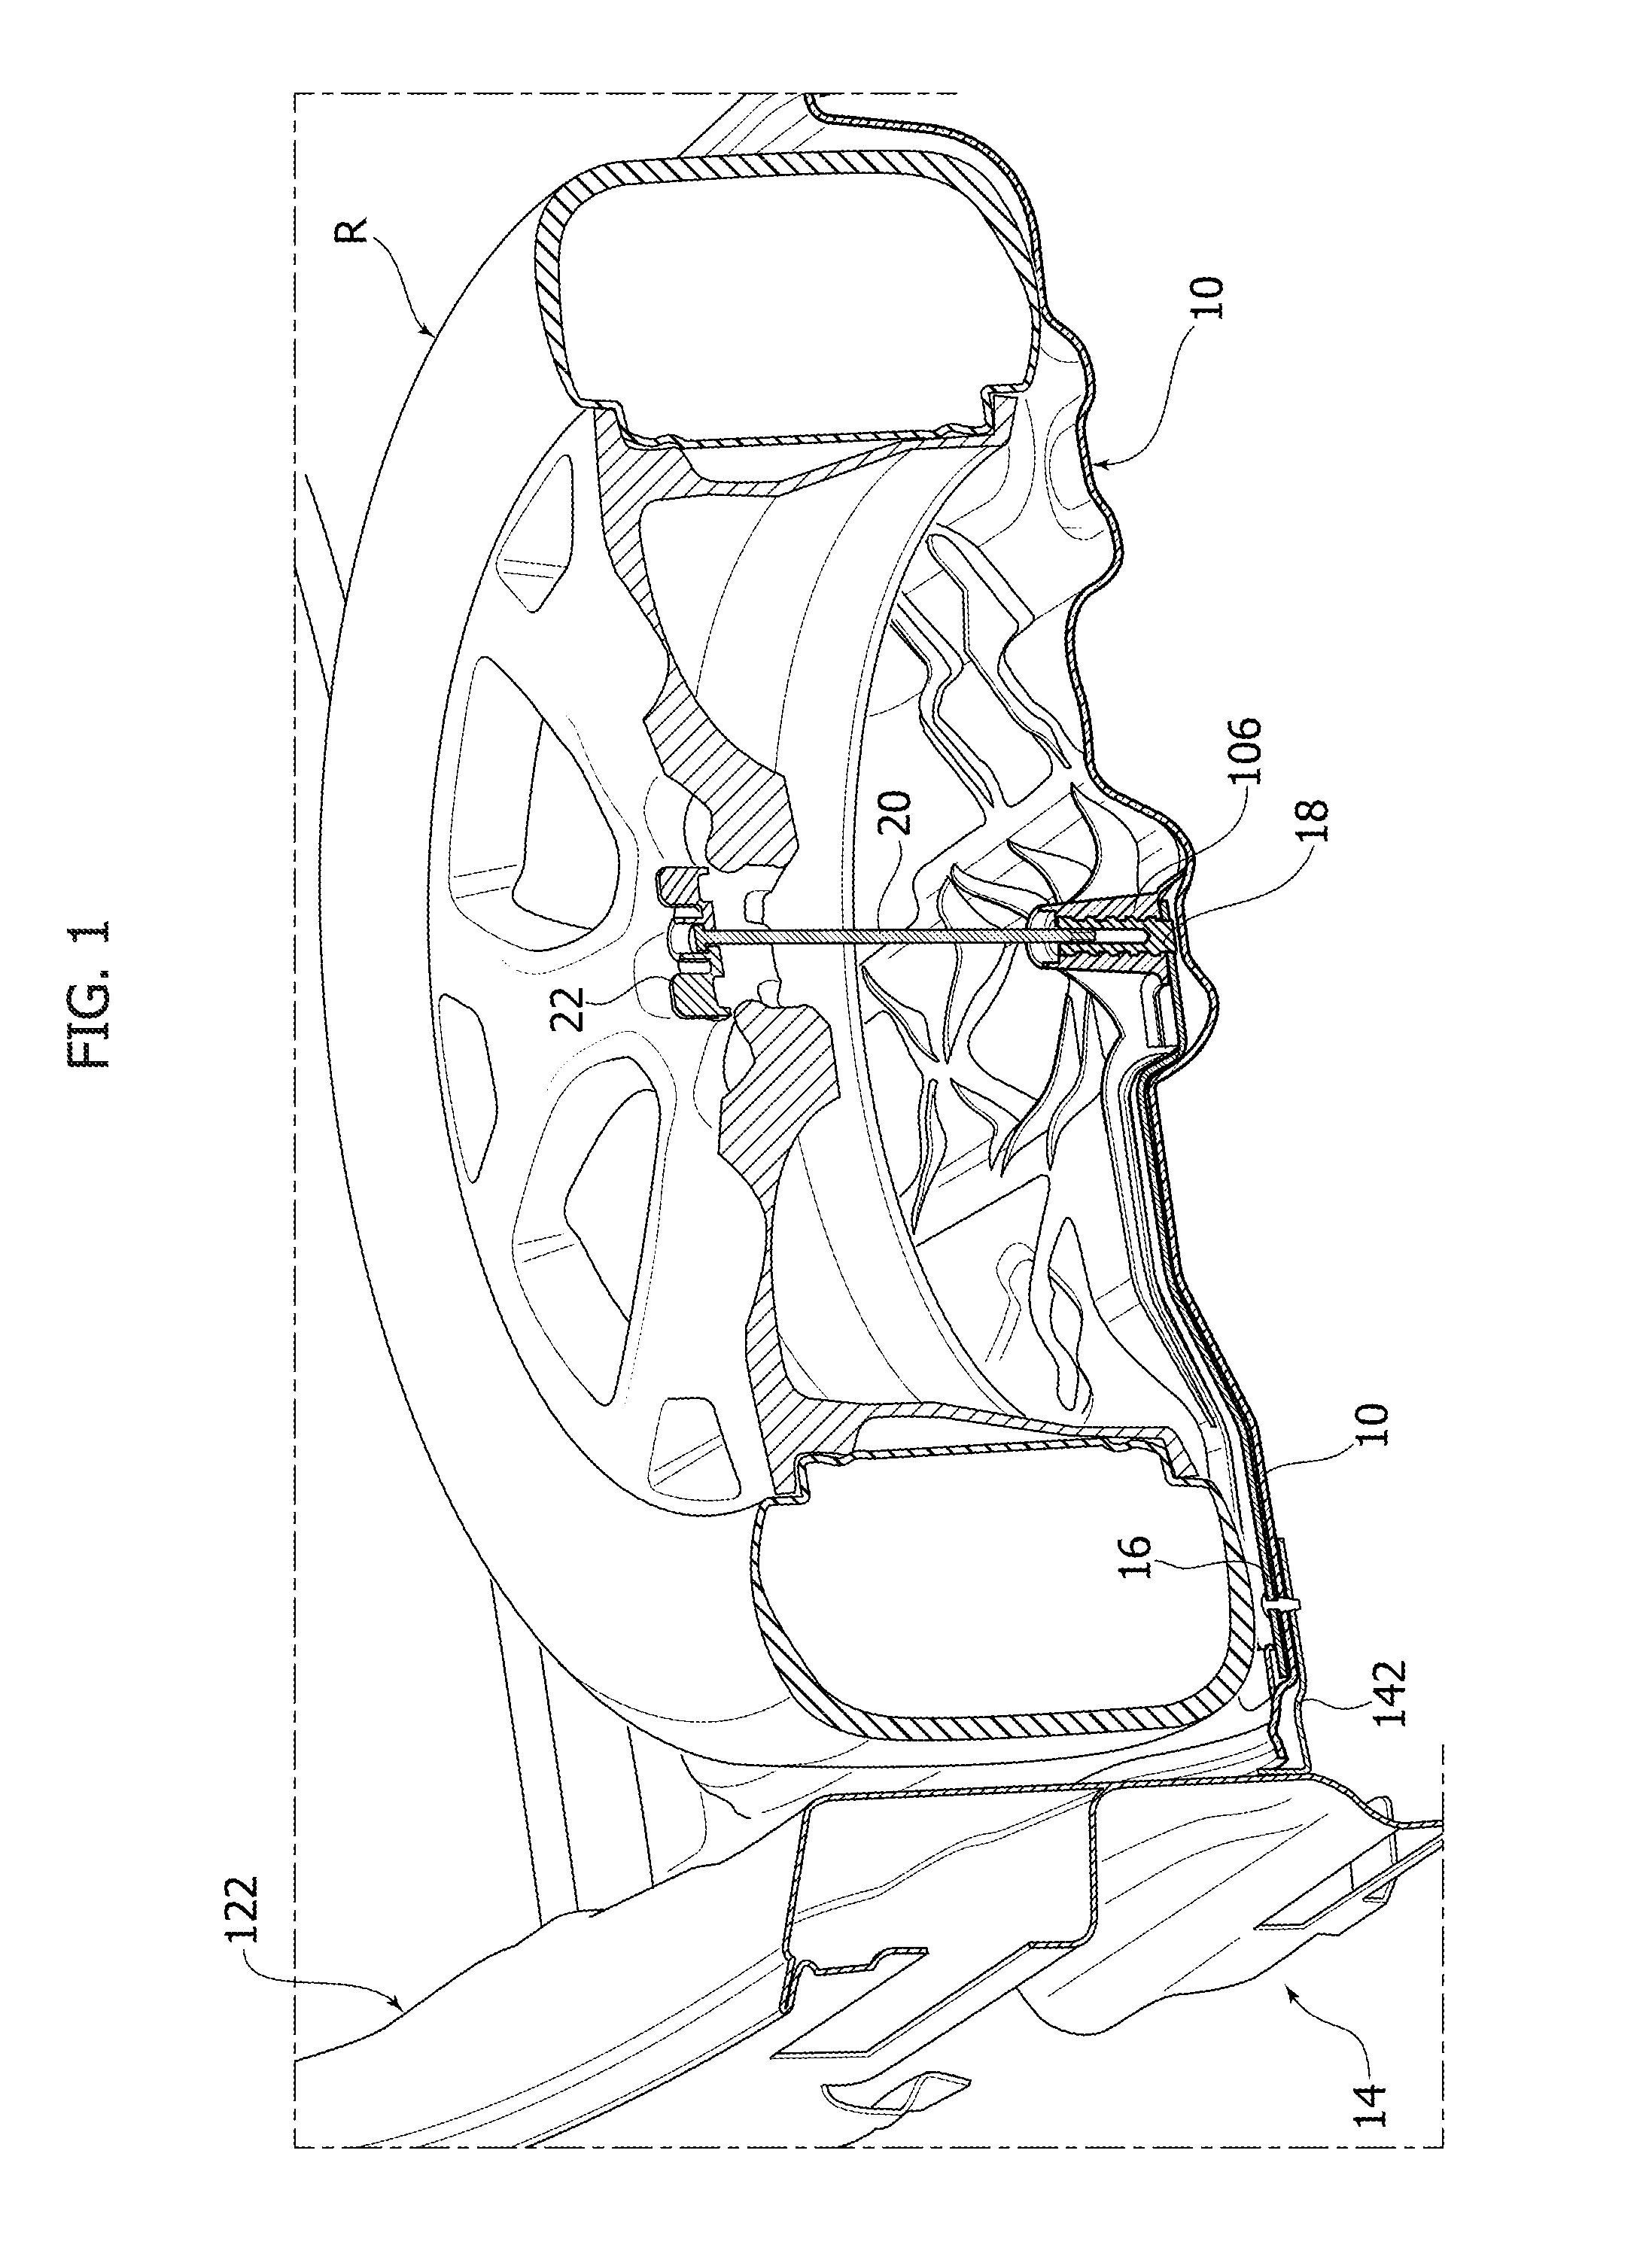 Motor-vehicle structure having a holding element for holding a spare wheel or other component on a floor portion made of plastic material